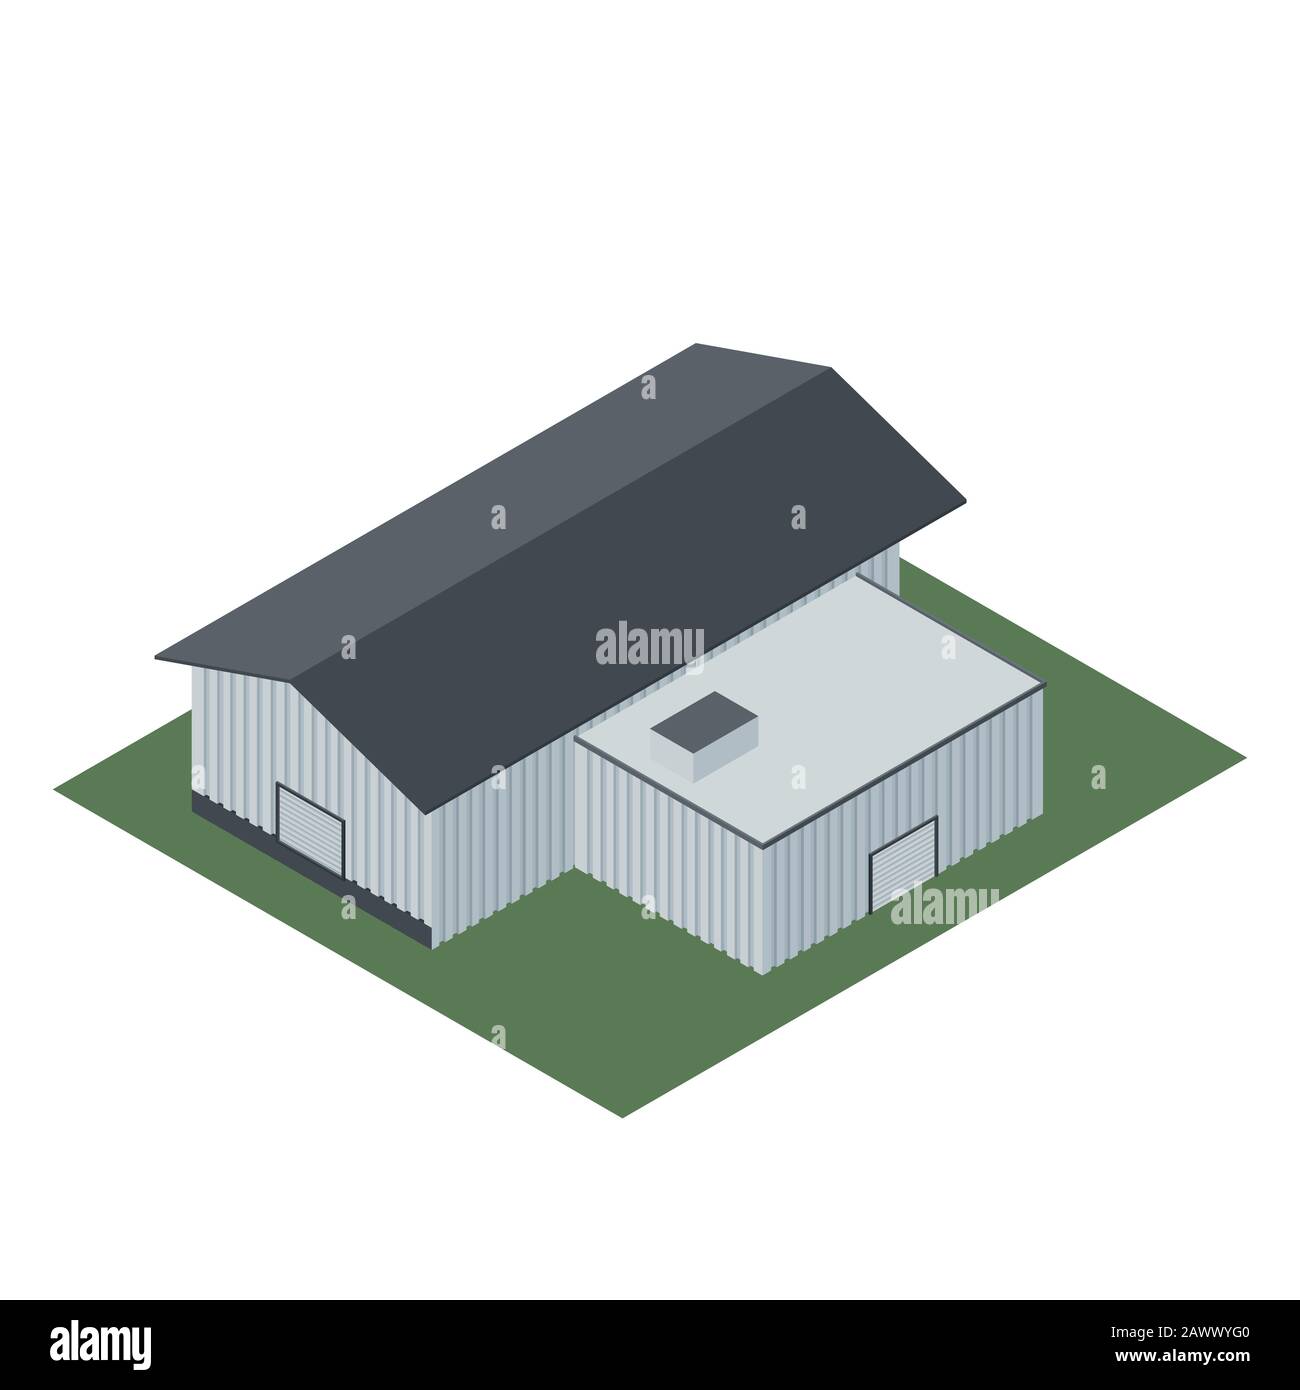 Isometric design of an industrial building for the manufacture of products Stock Vector